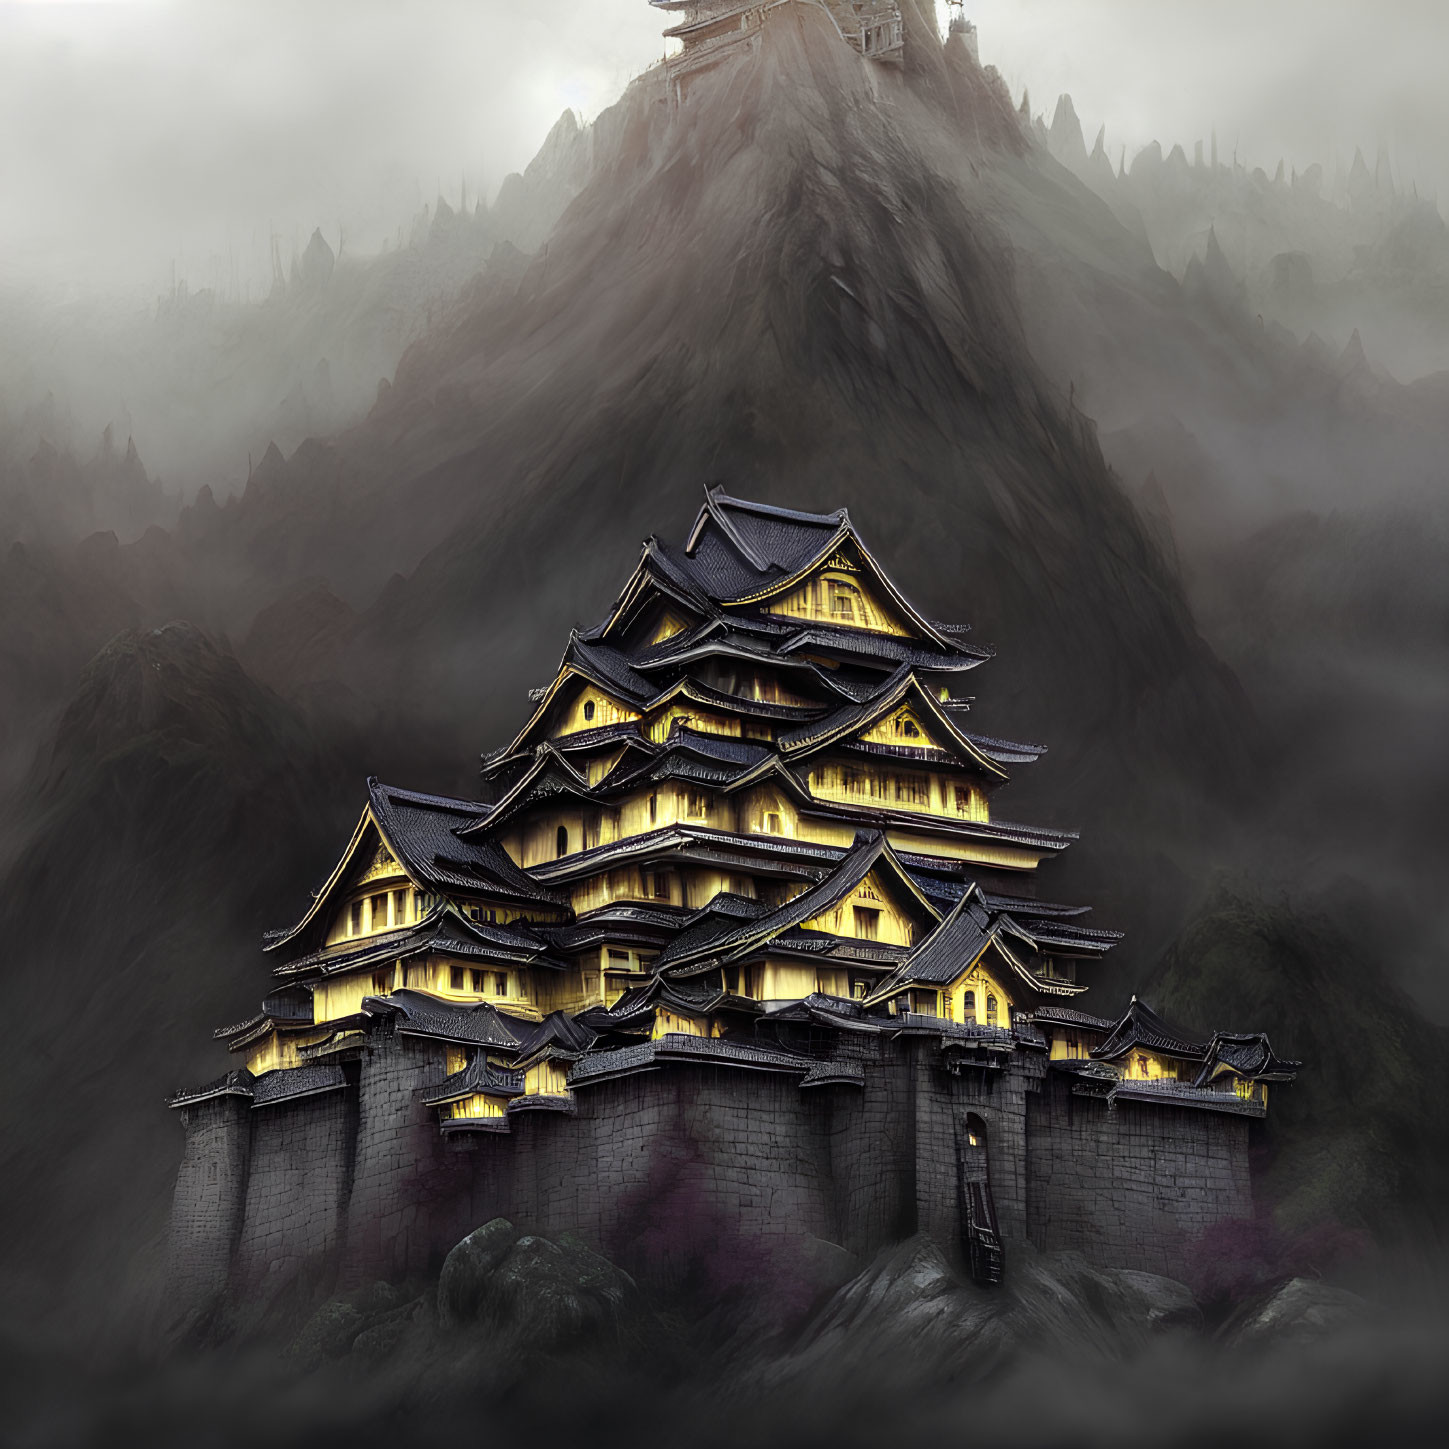 Traditional Japanese castle on stone wall with mist and mountains